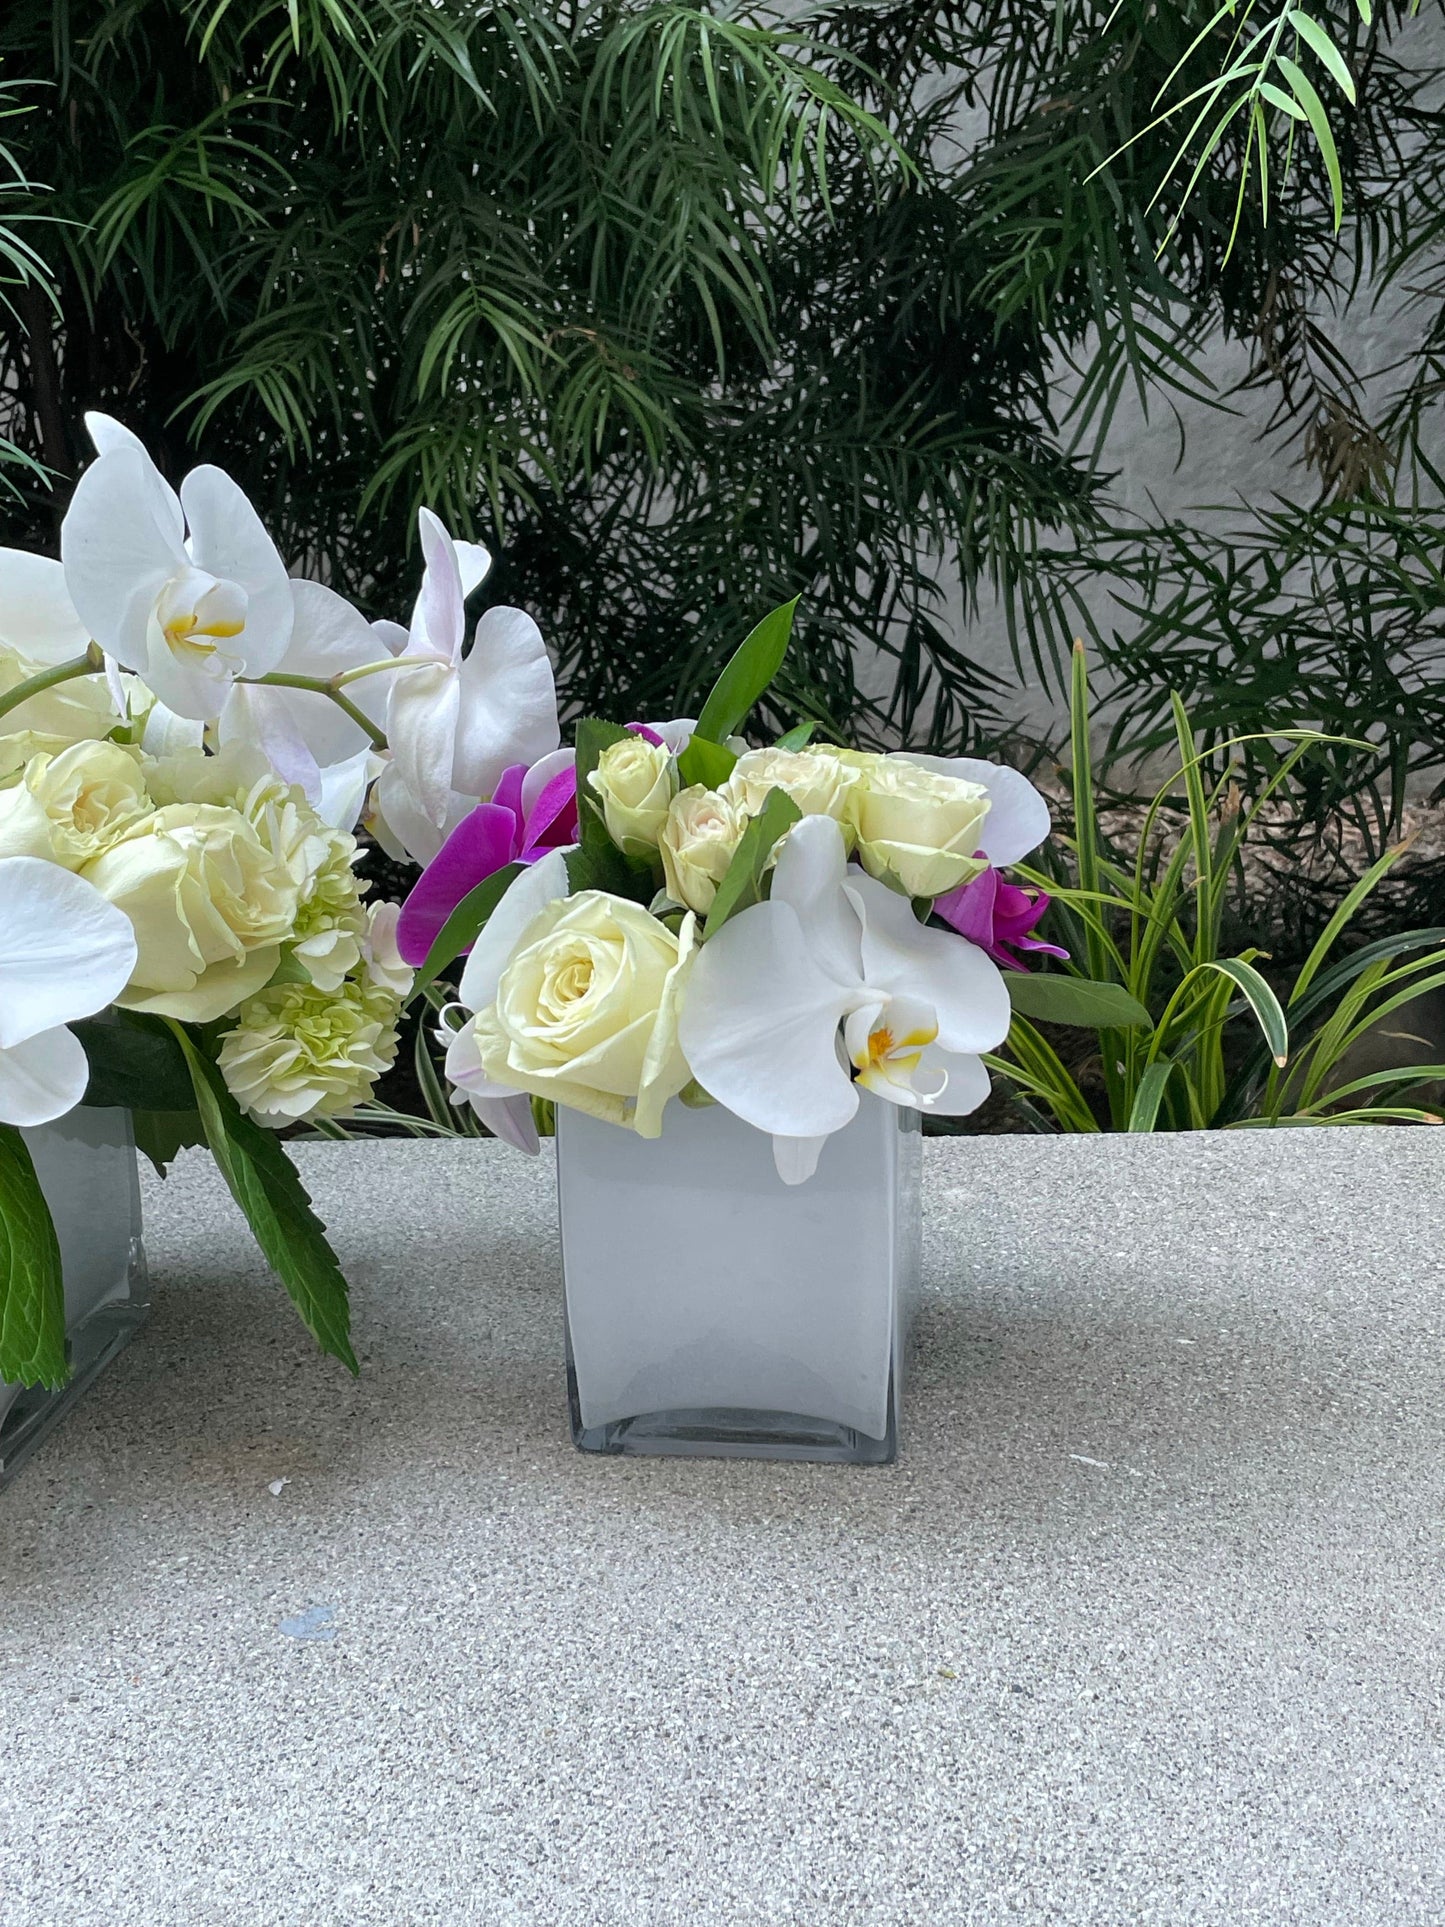 Flowers in small vase